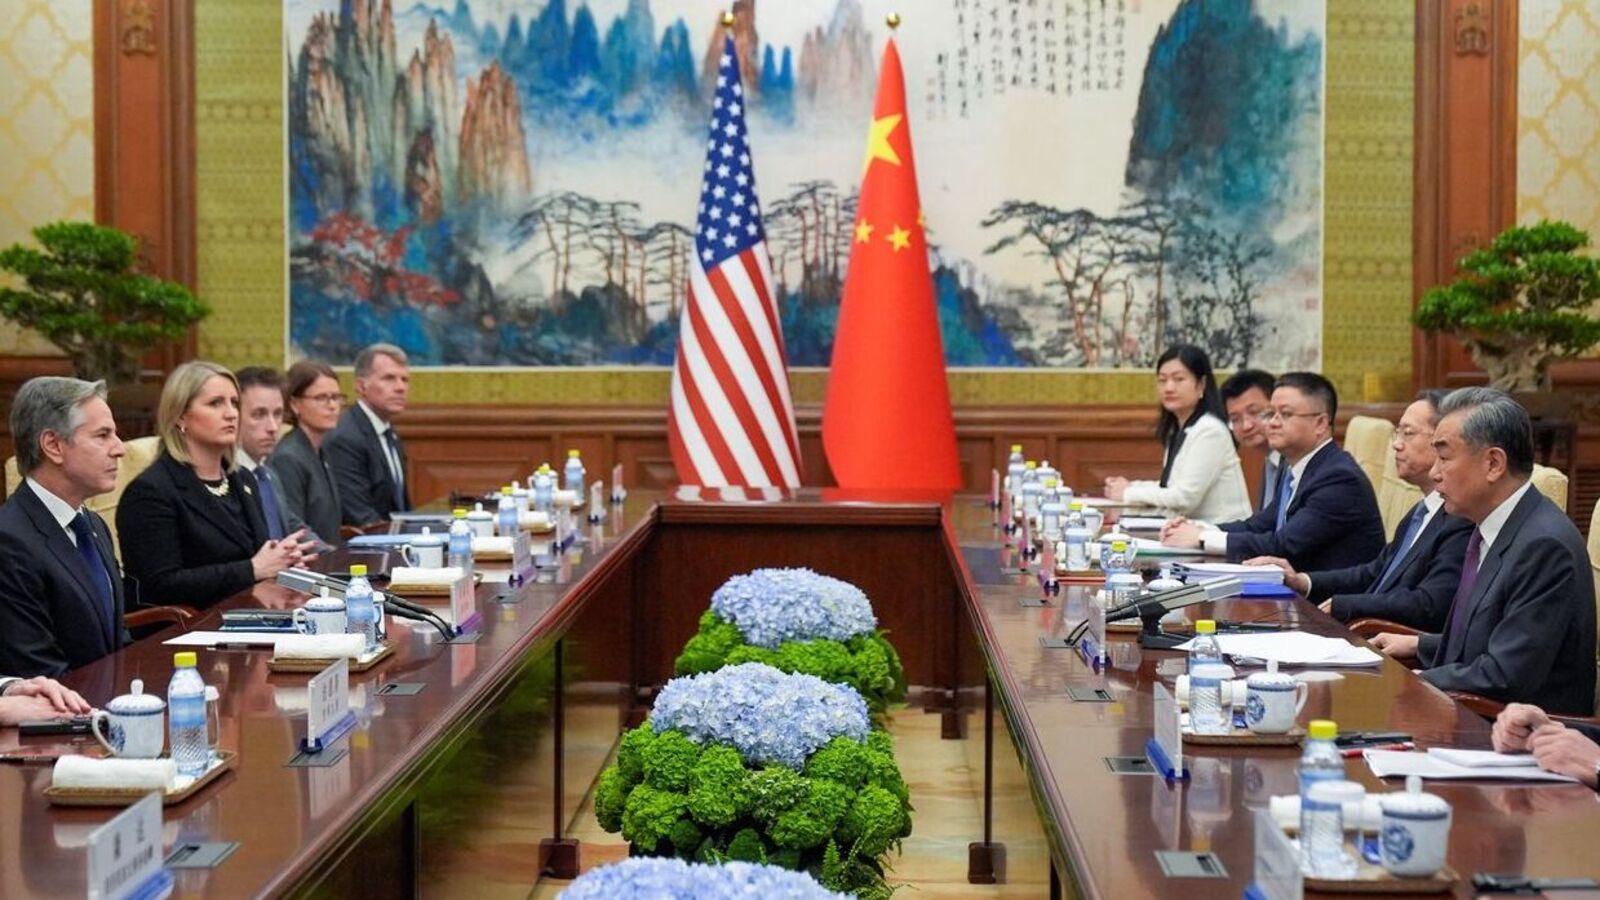 Blinken meets with Xi as US pressures China to end support for Russia